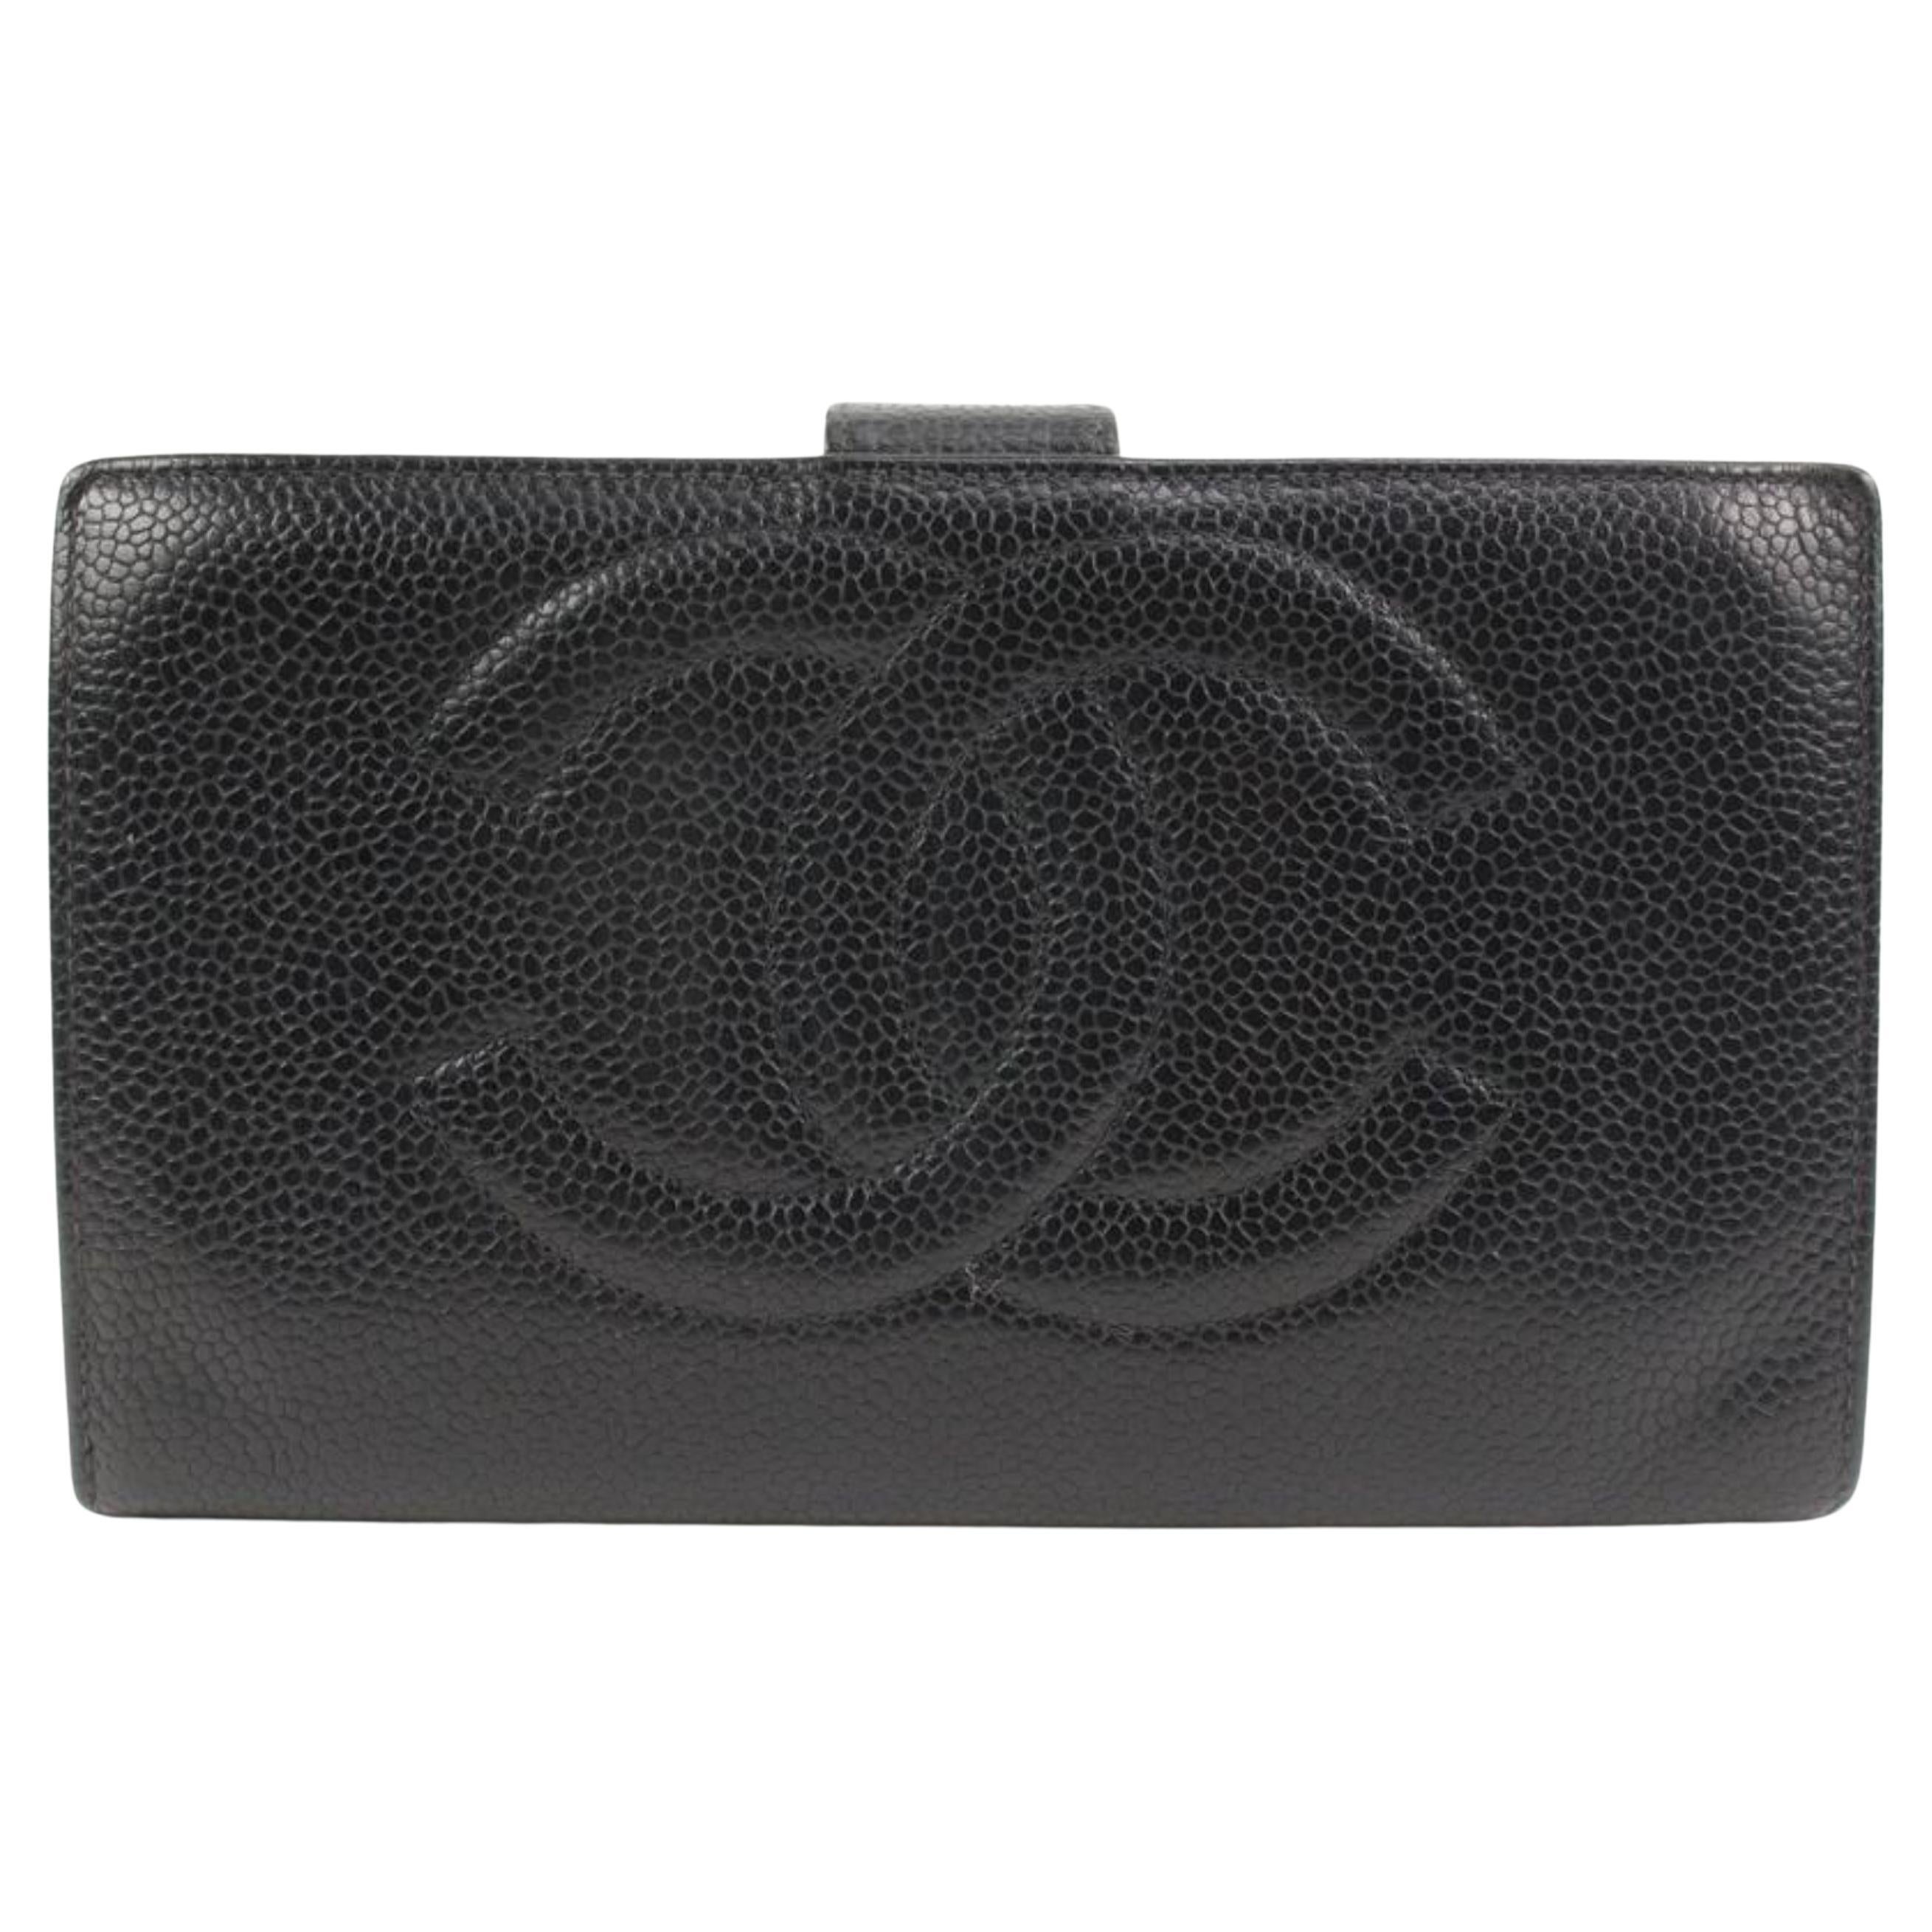 Chanel Black Caviar Leather CC Logo Long Snap Bifold Wallet 53ck32s For Sale